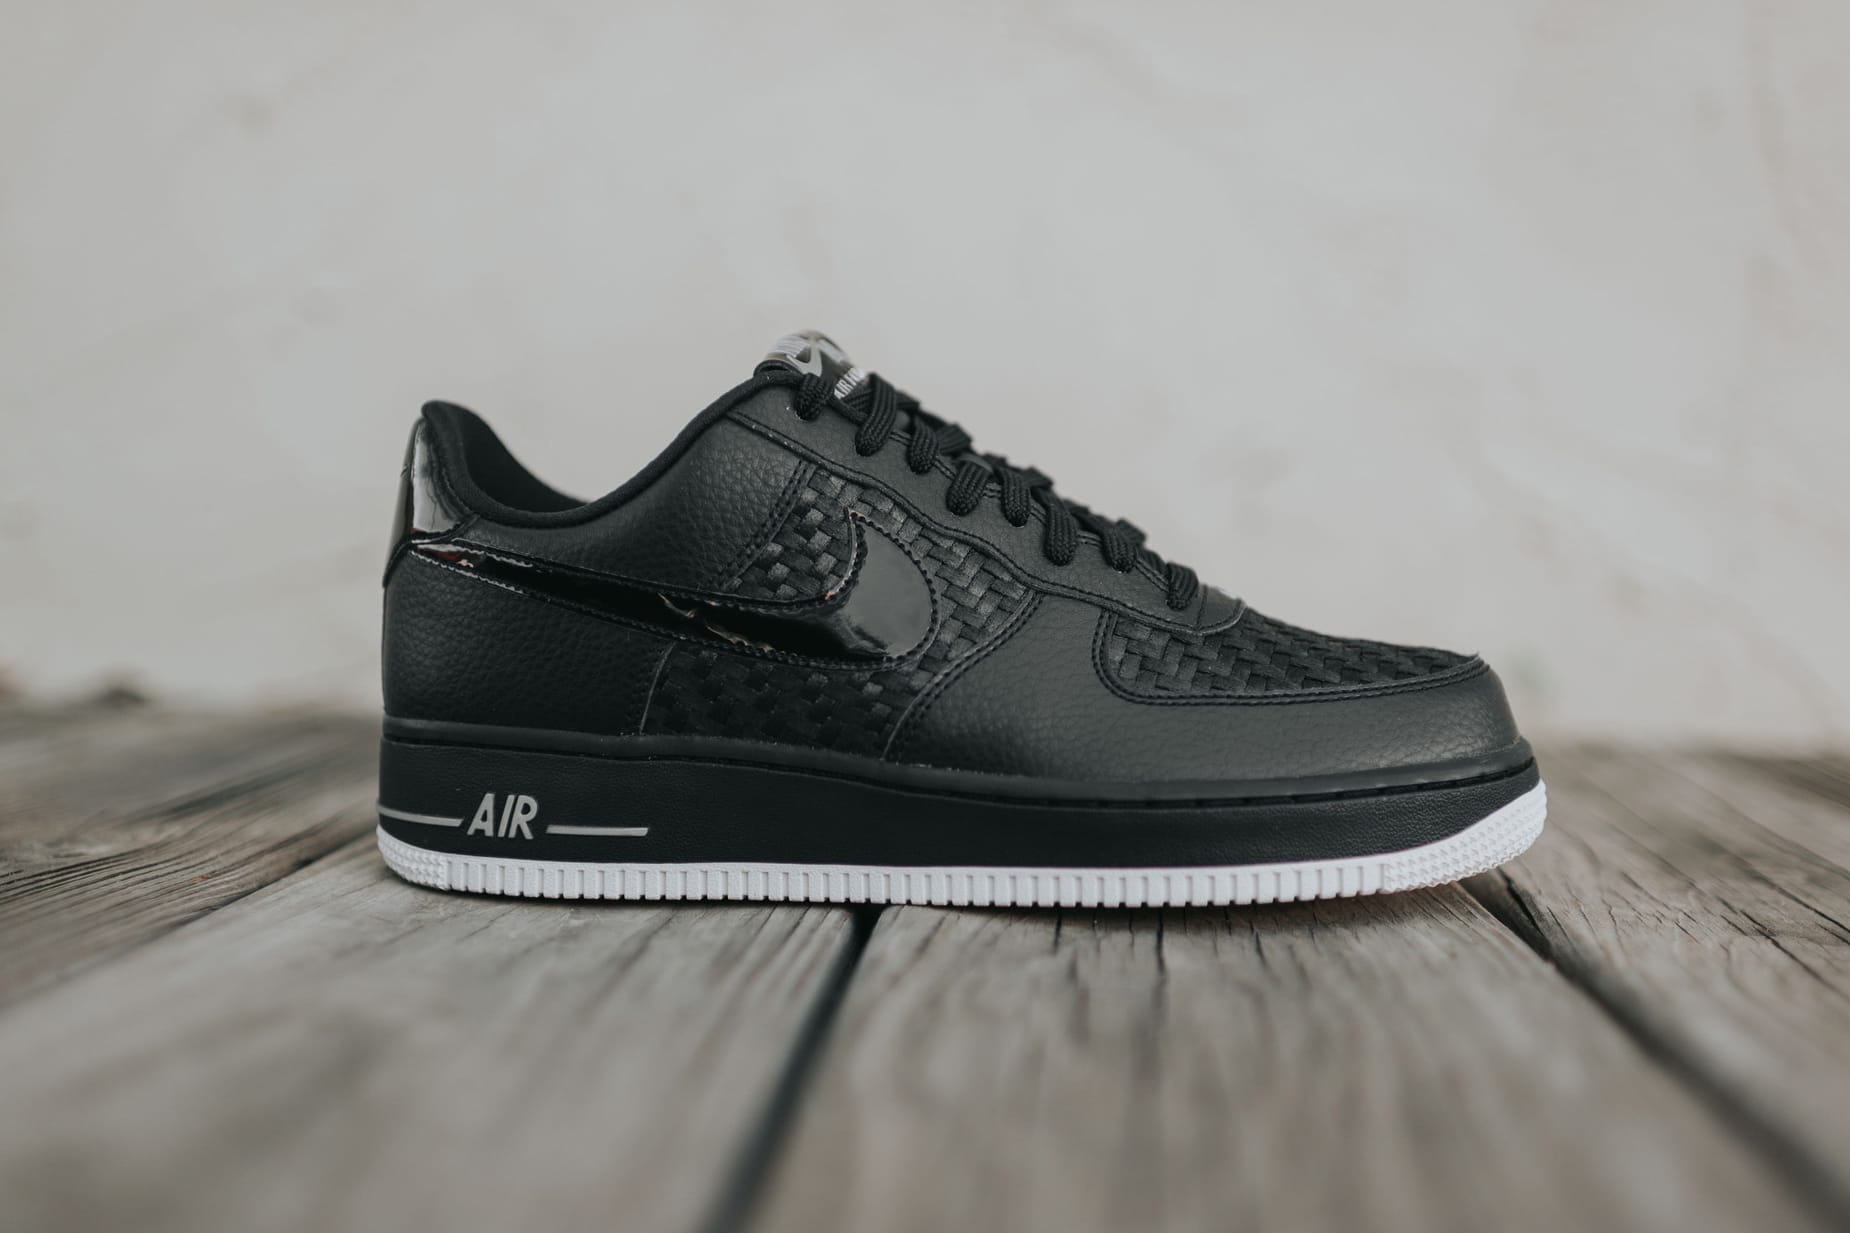 Nike Air Force 1 Low 07 LV8 Black Woven 